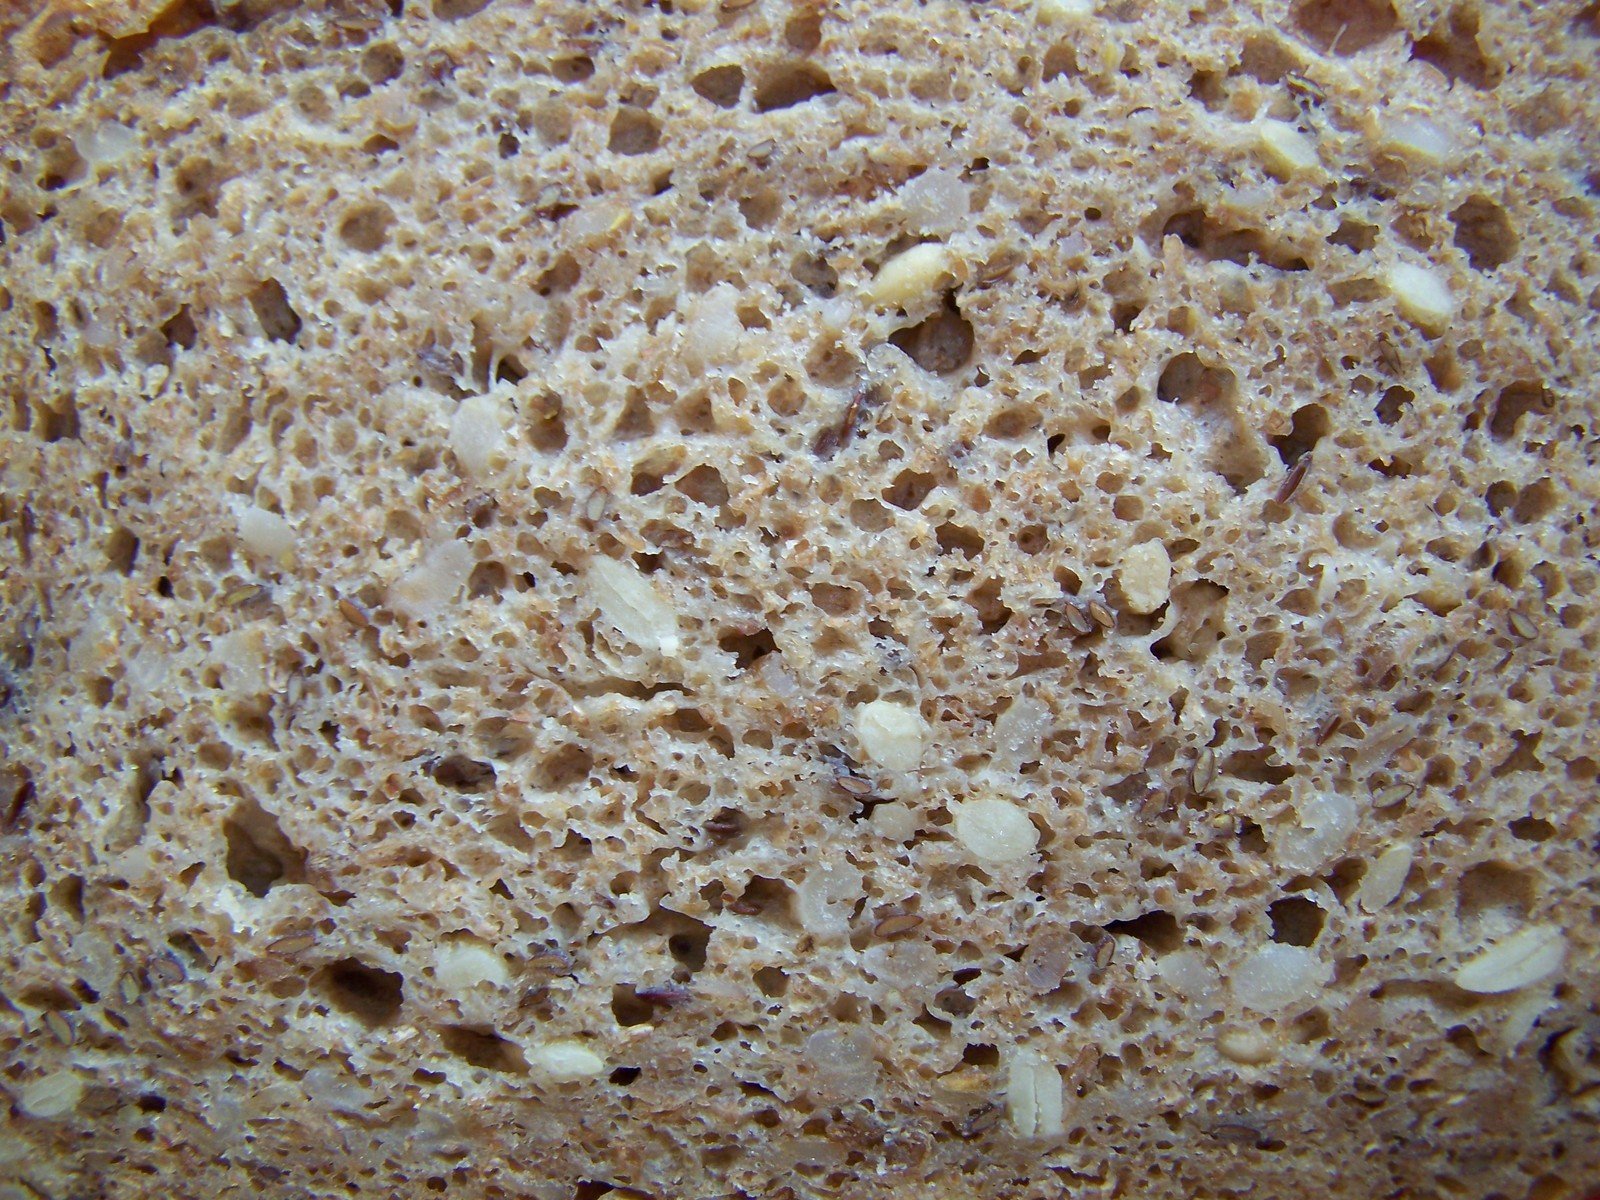 closeup of sand dollars in a piece of bread